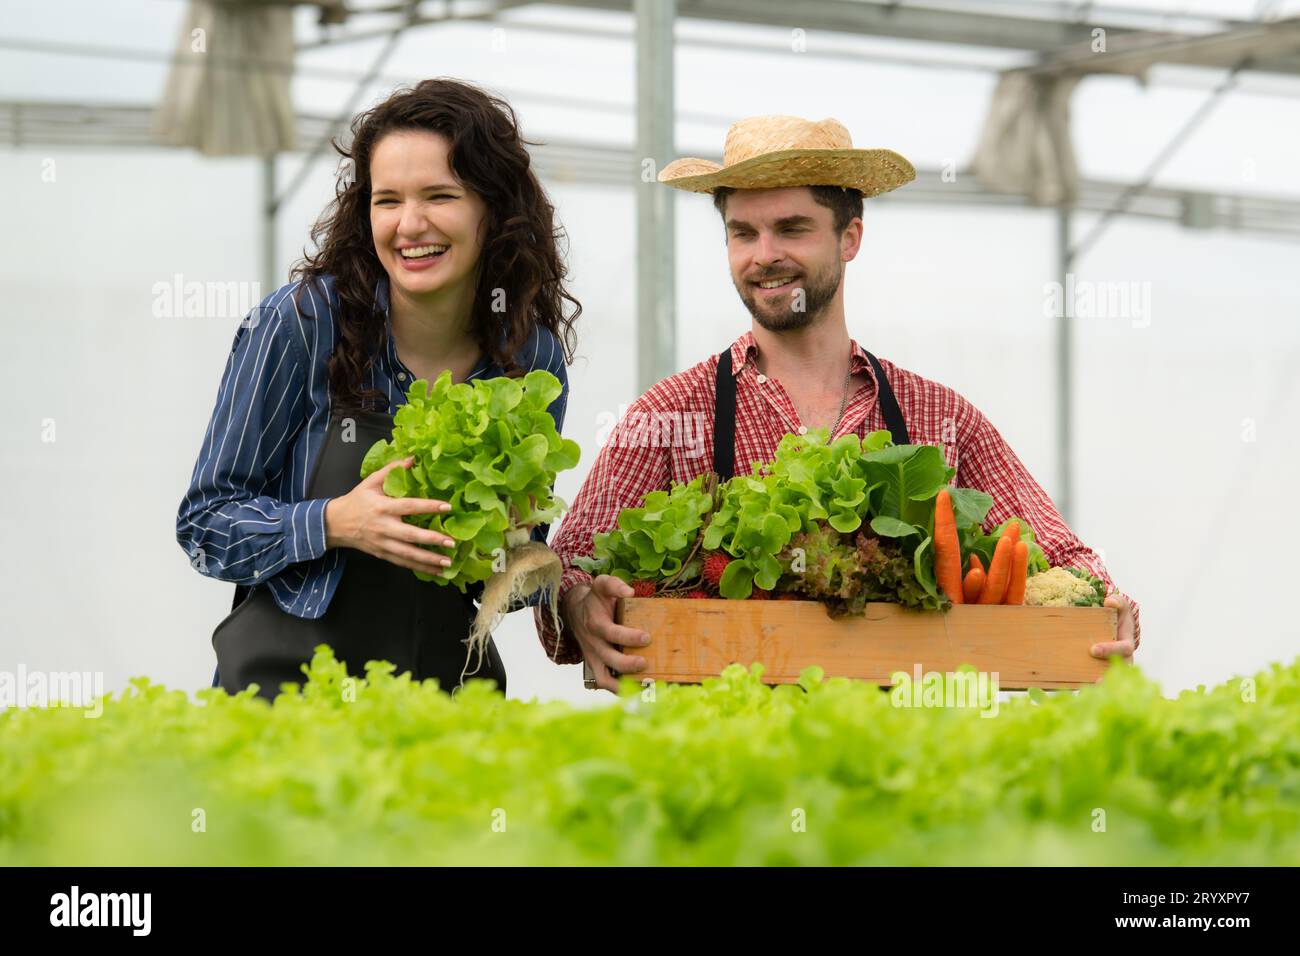 Both small business owners have organic vegetable gardens, They picking fresh veggies to deliver to consumers. Stock Photo